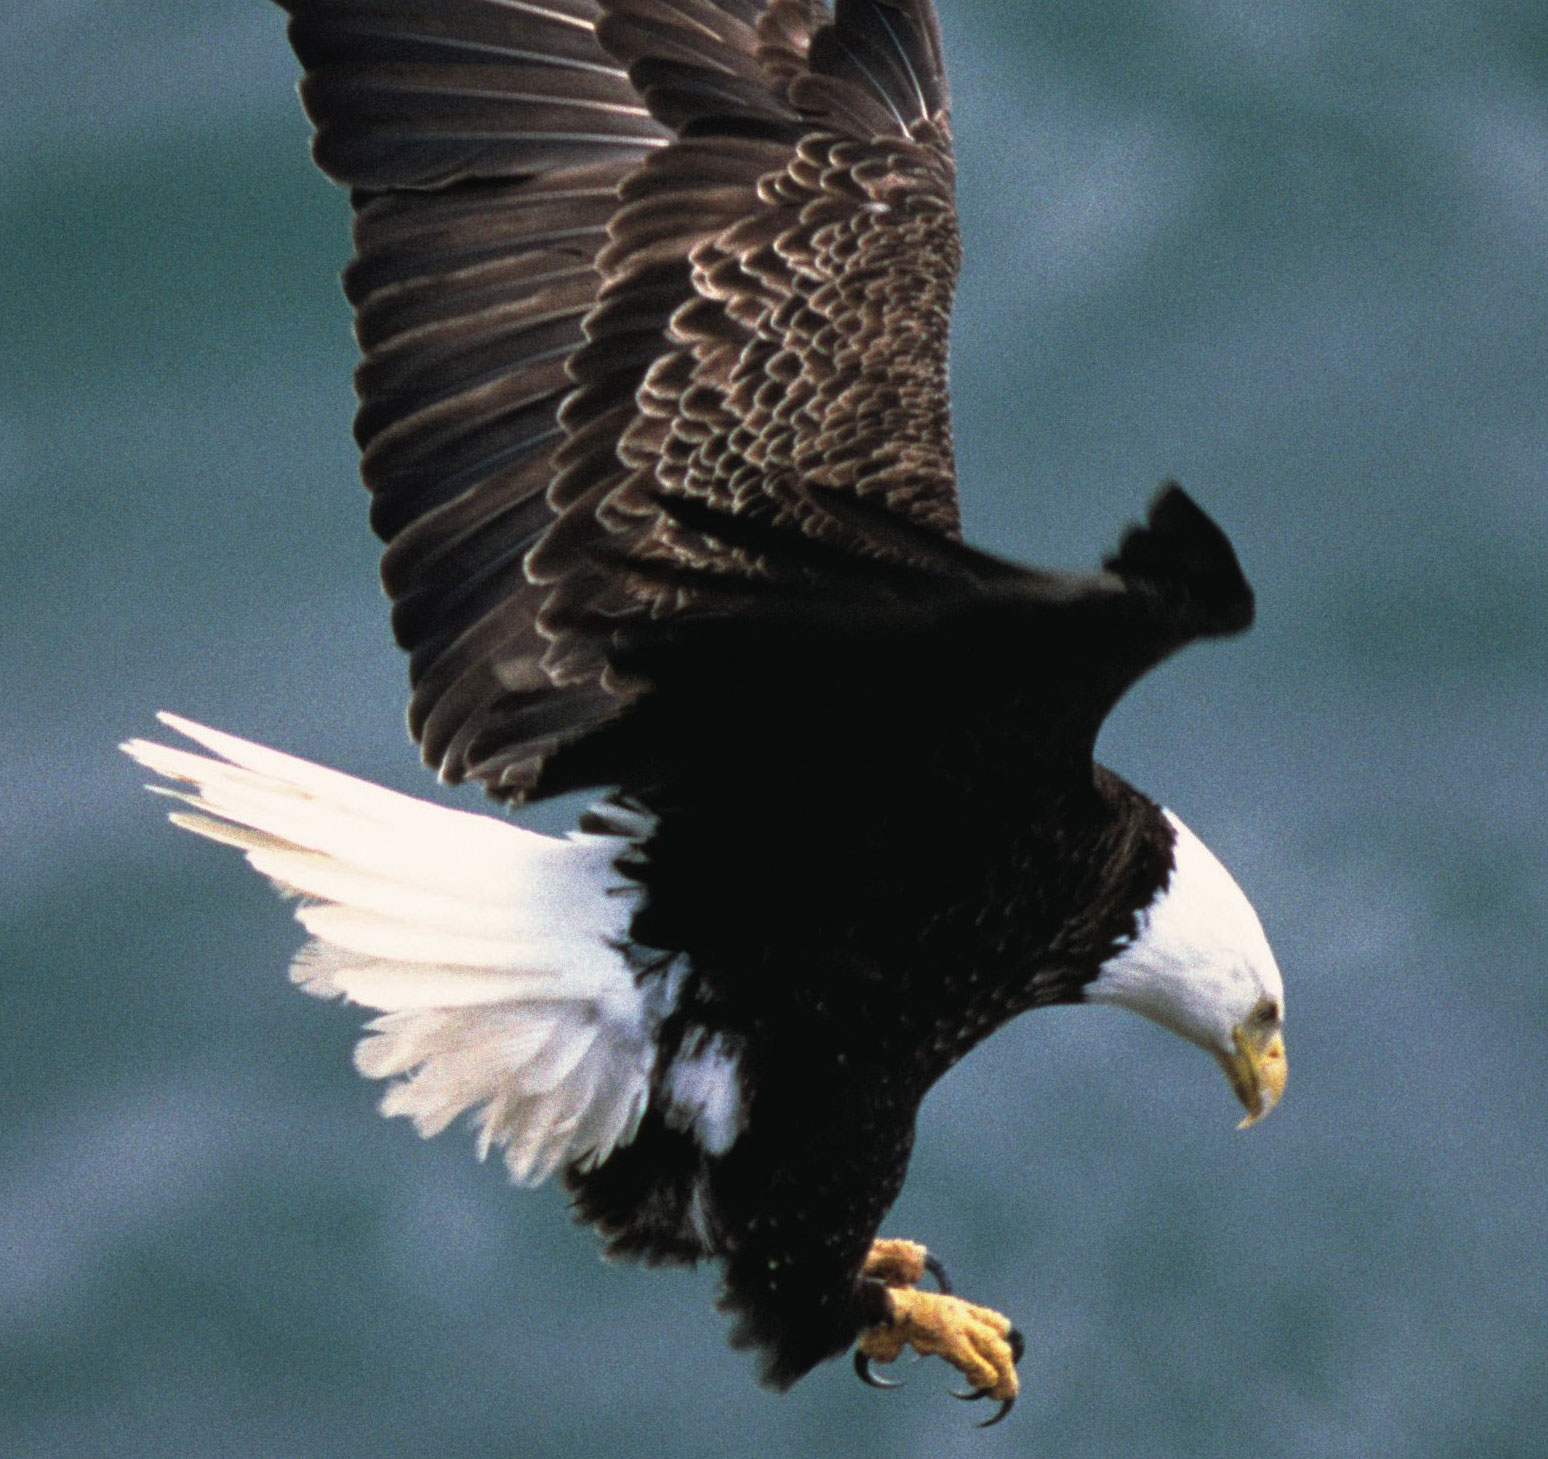 Michigan Drone Plunged to Watery Death in Eagle Attack | Courthouse News  Service